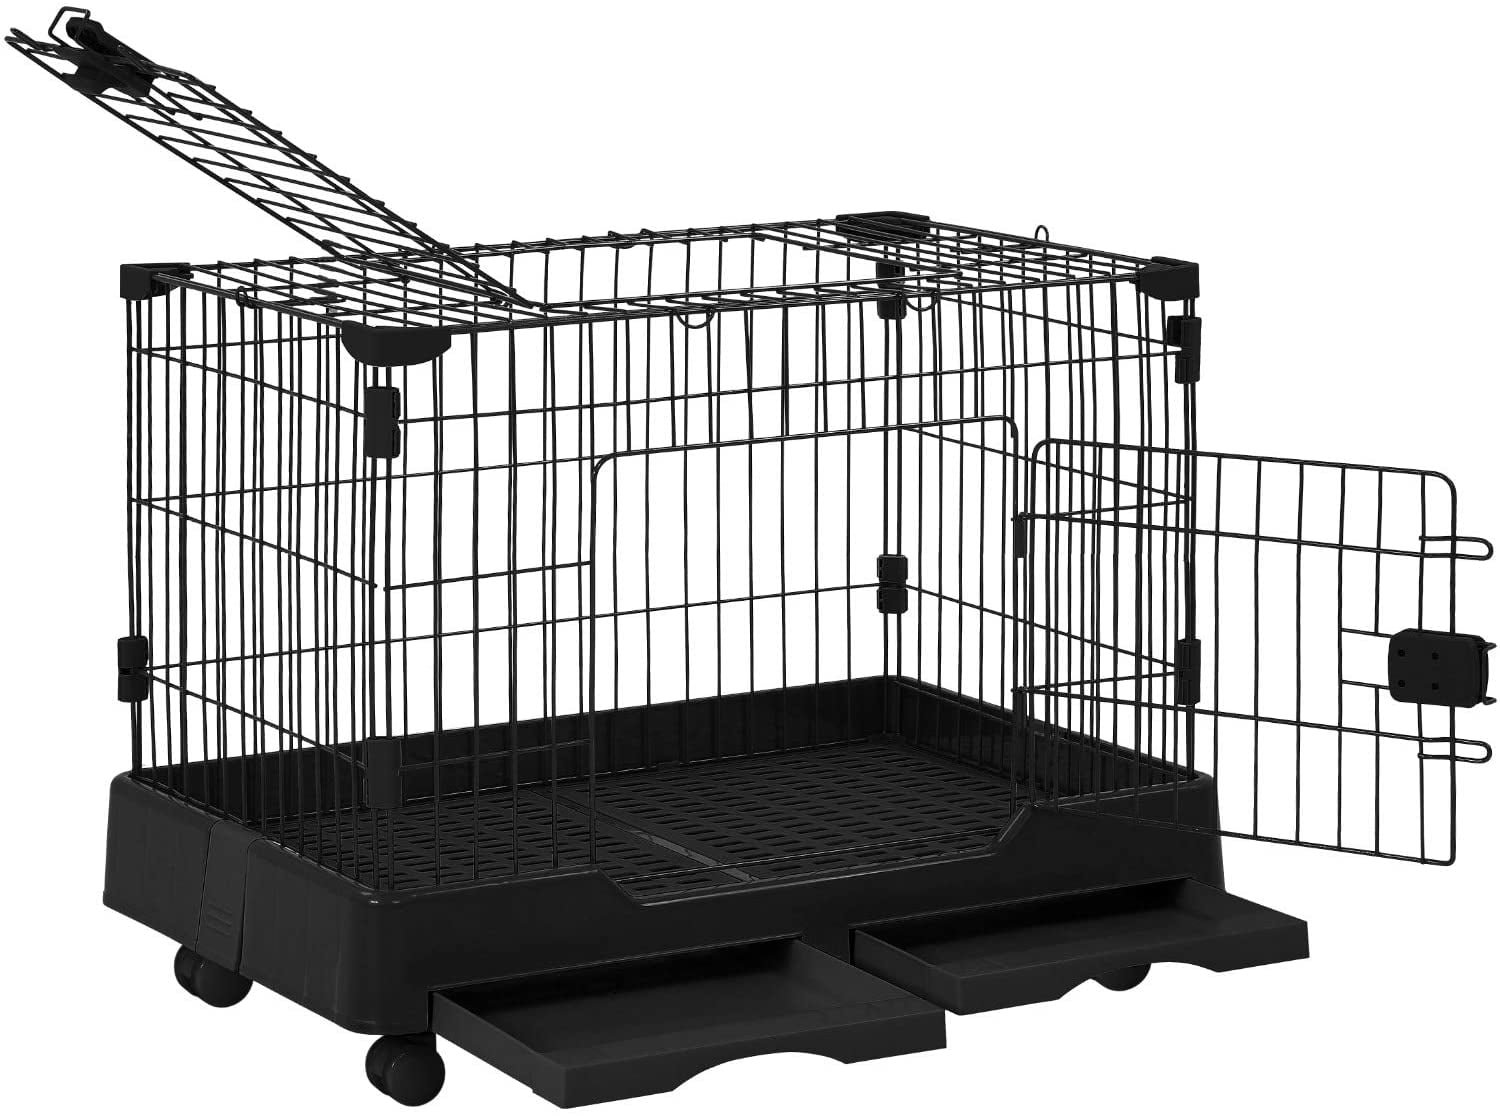 SCFANG Cat Cage Playpen Kennel Crate Cat cage Villa Square Tube cat cage Two-Story cattery cage 604573cm 